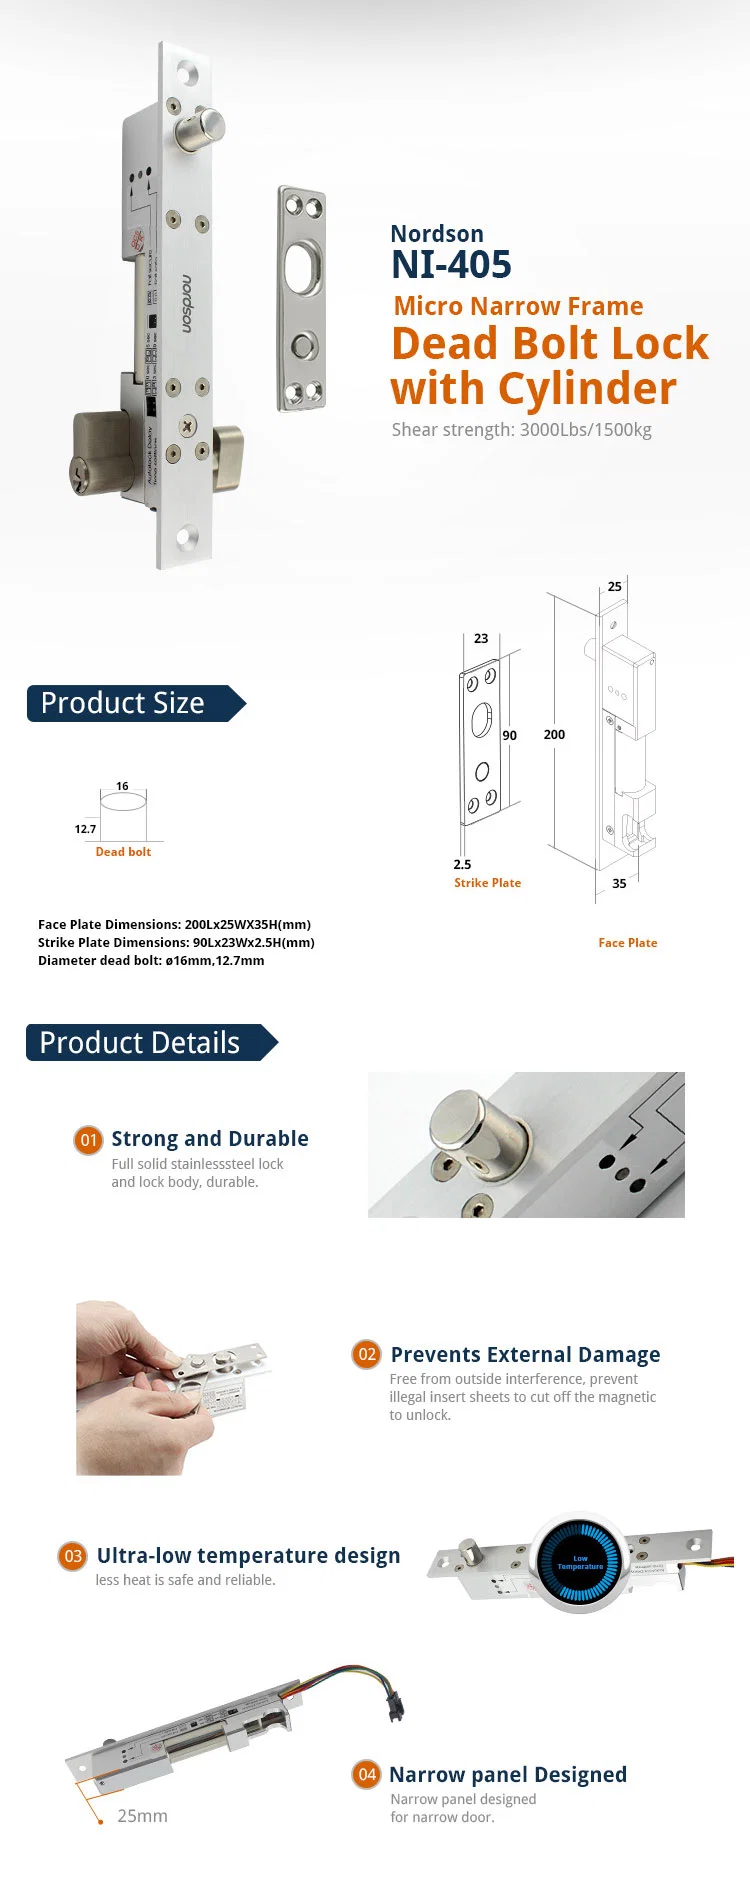 Adjustable Mode Fail-Secure&Fail-Safe Full Solid Stainless Steel Micro Electric Bolt Lock with Emergency Key